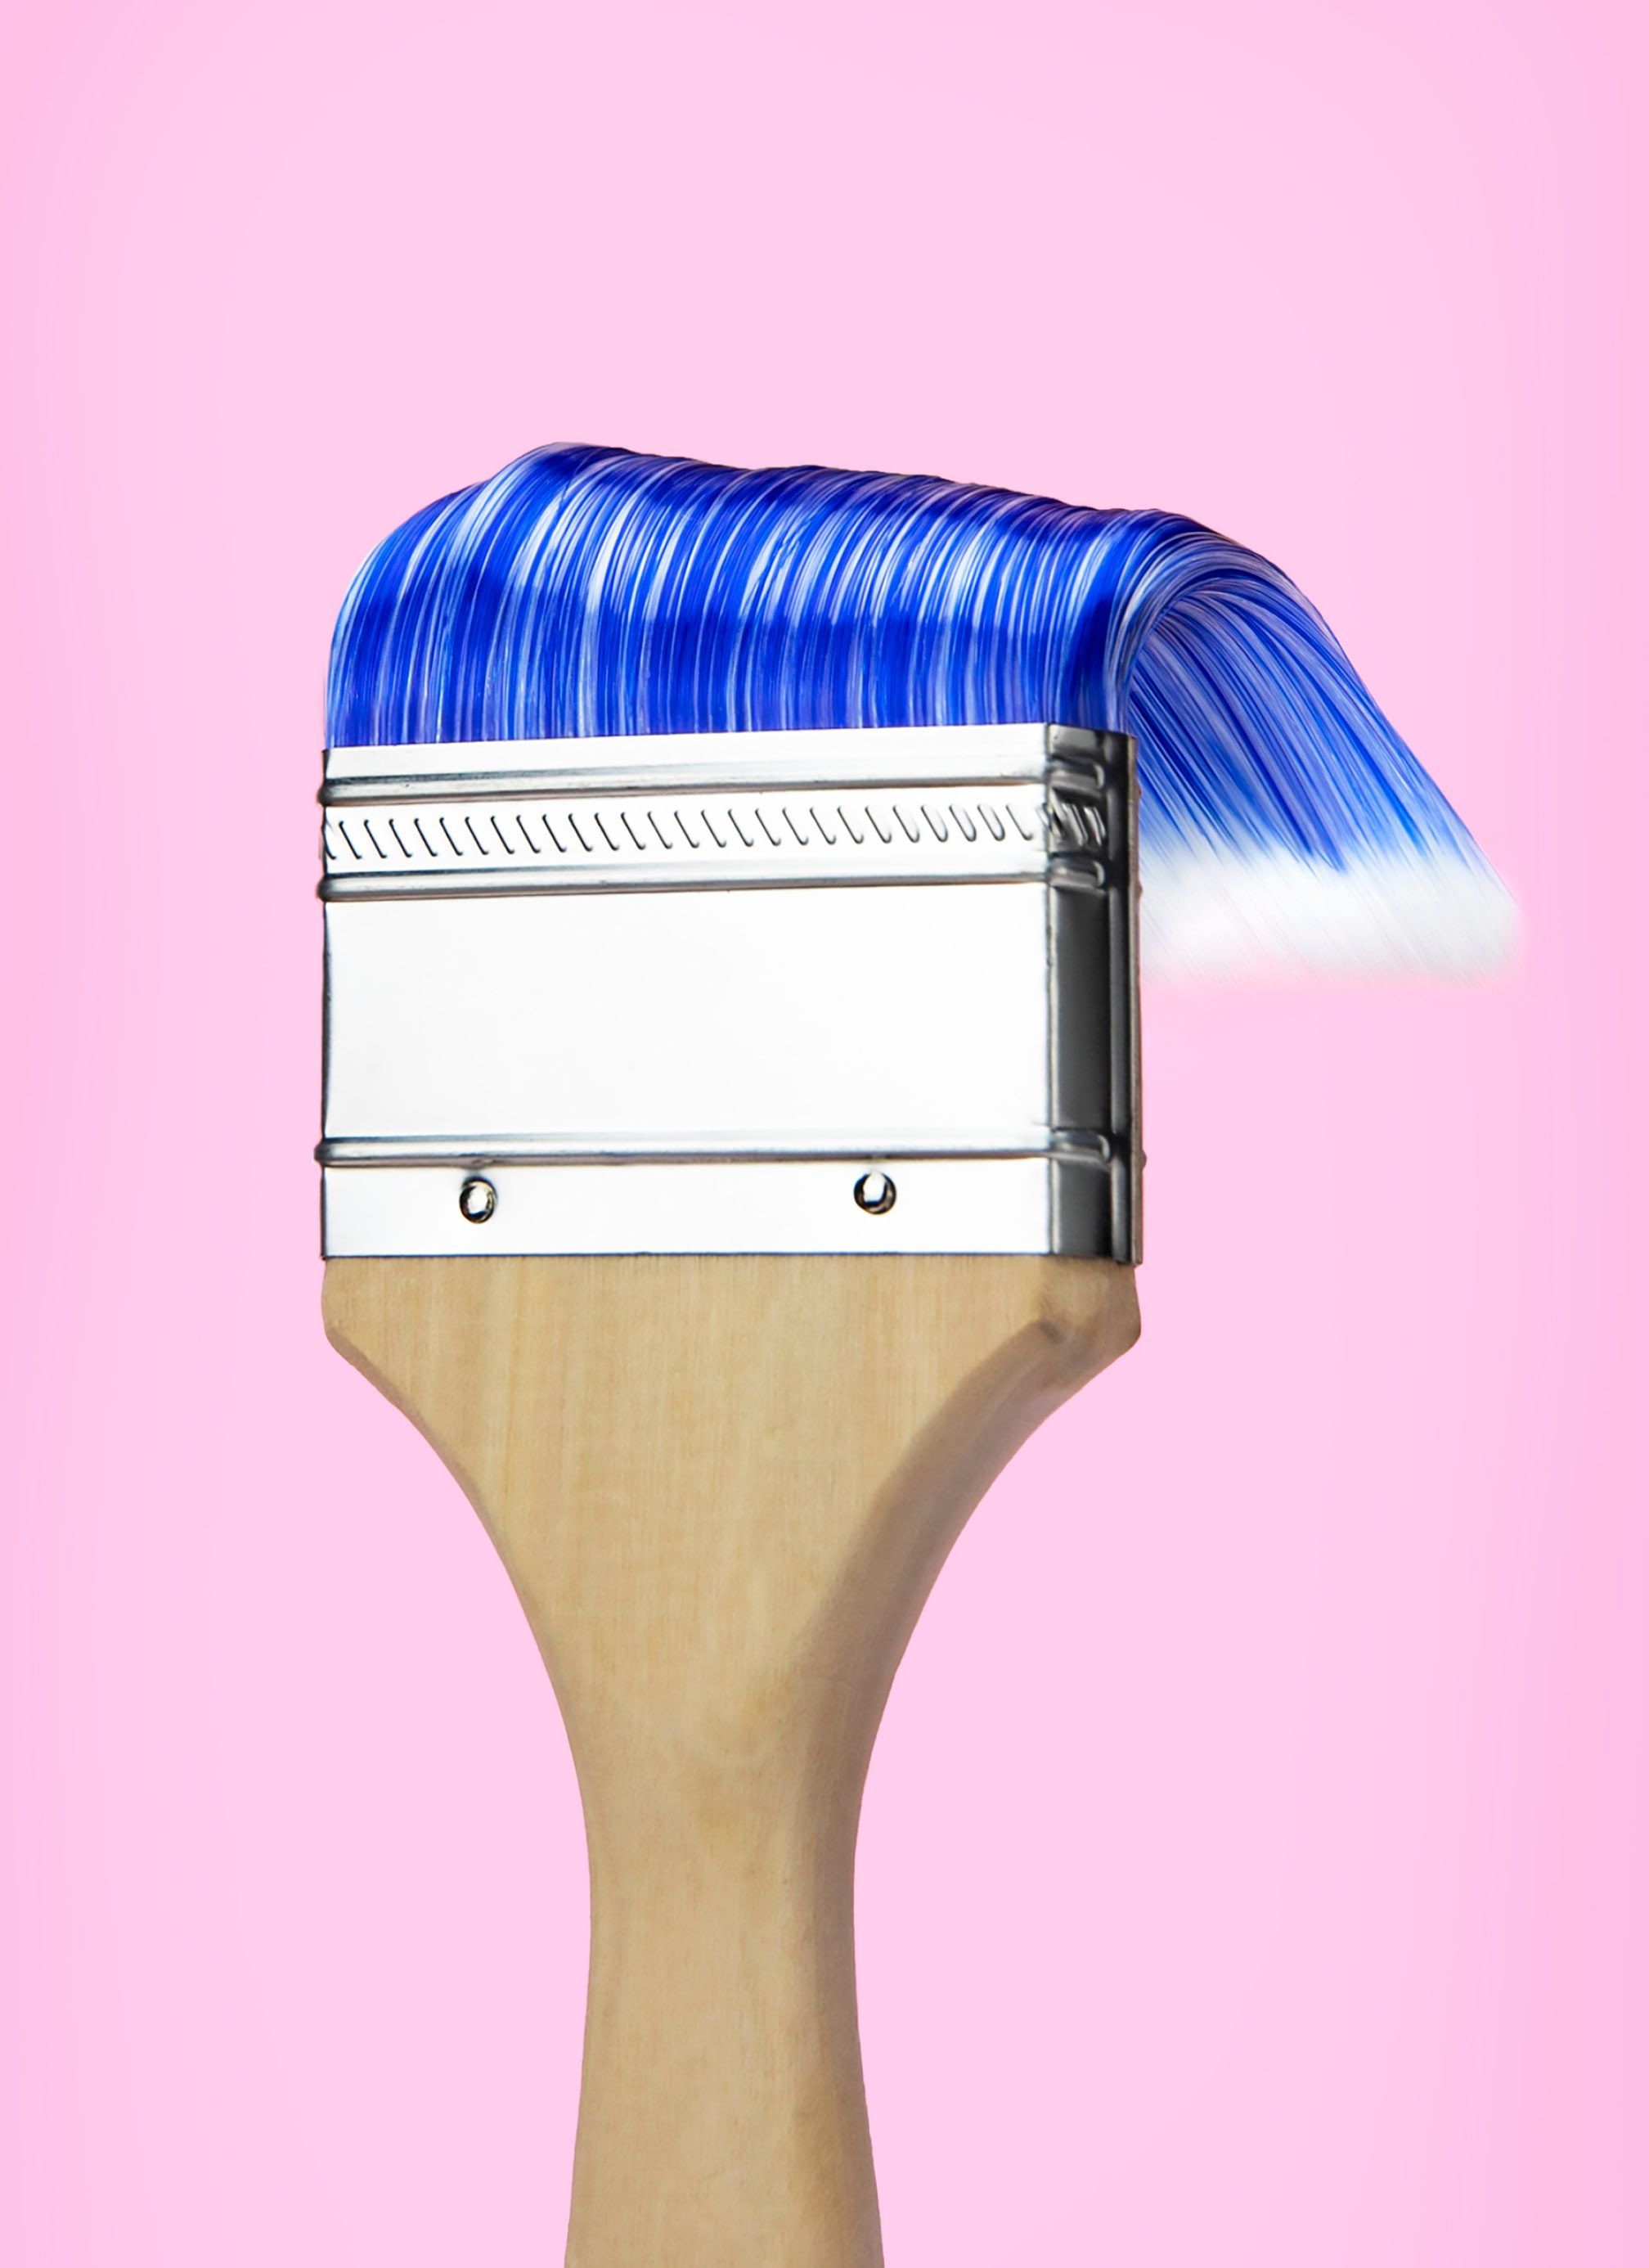 A blue paintbrush with its bristles slicked back like hair.